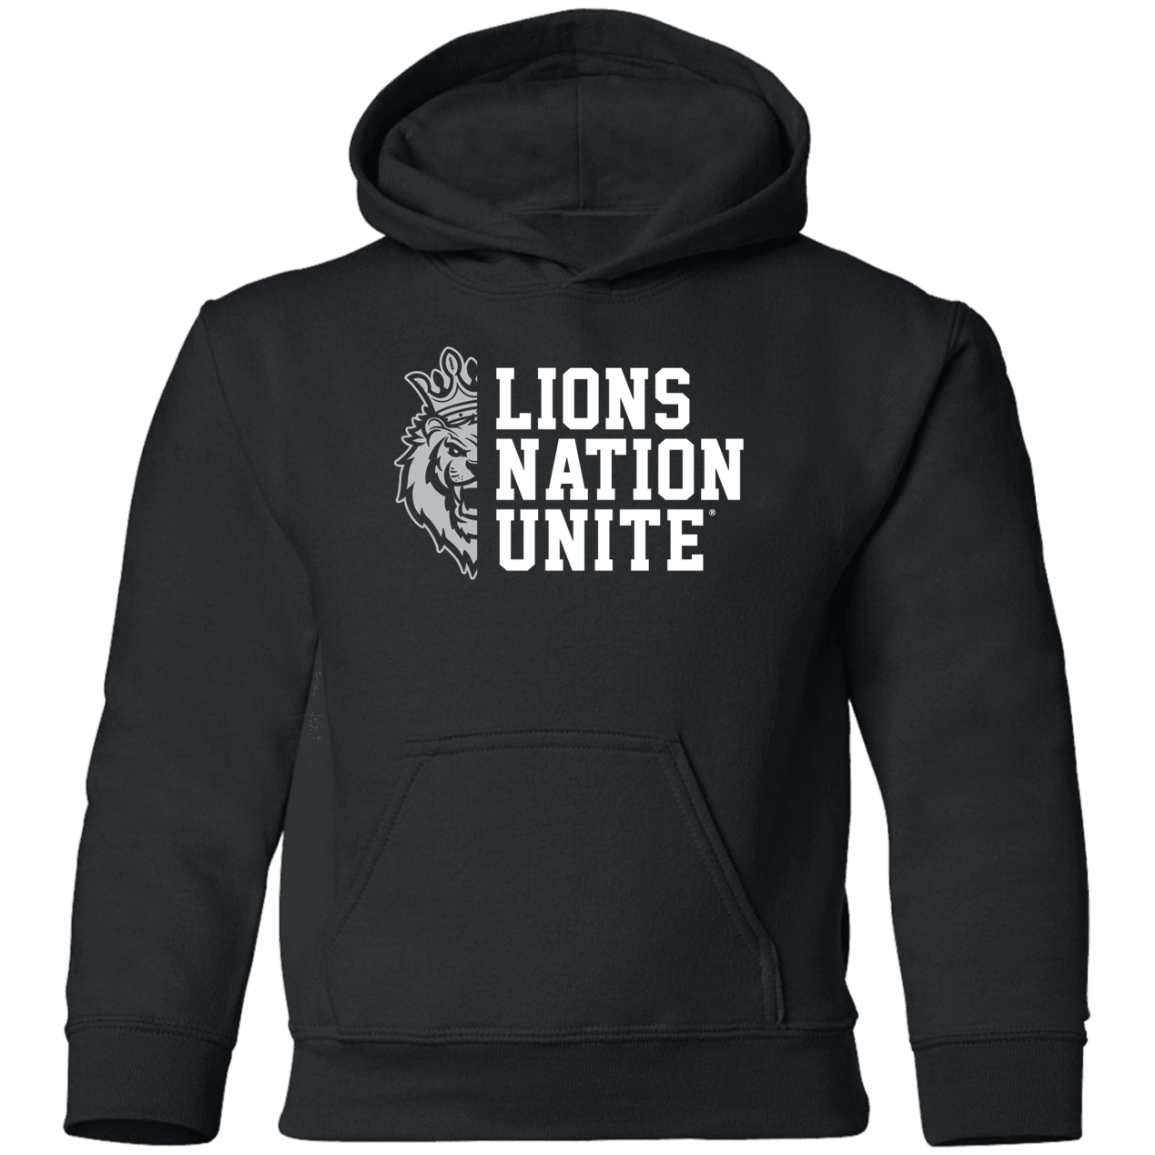 Lions Nation Unite® Youth Pullover Hoodie